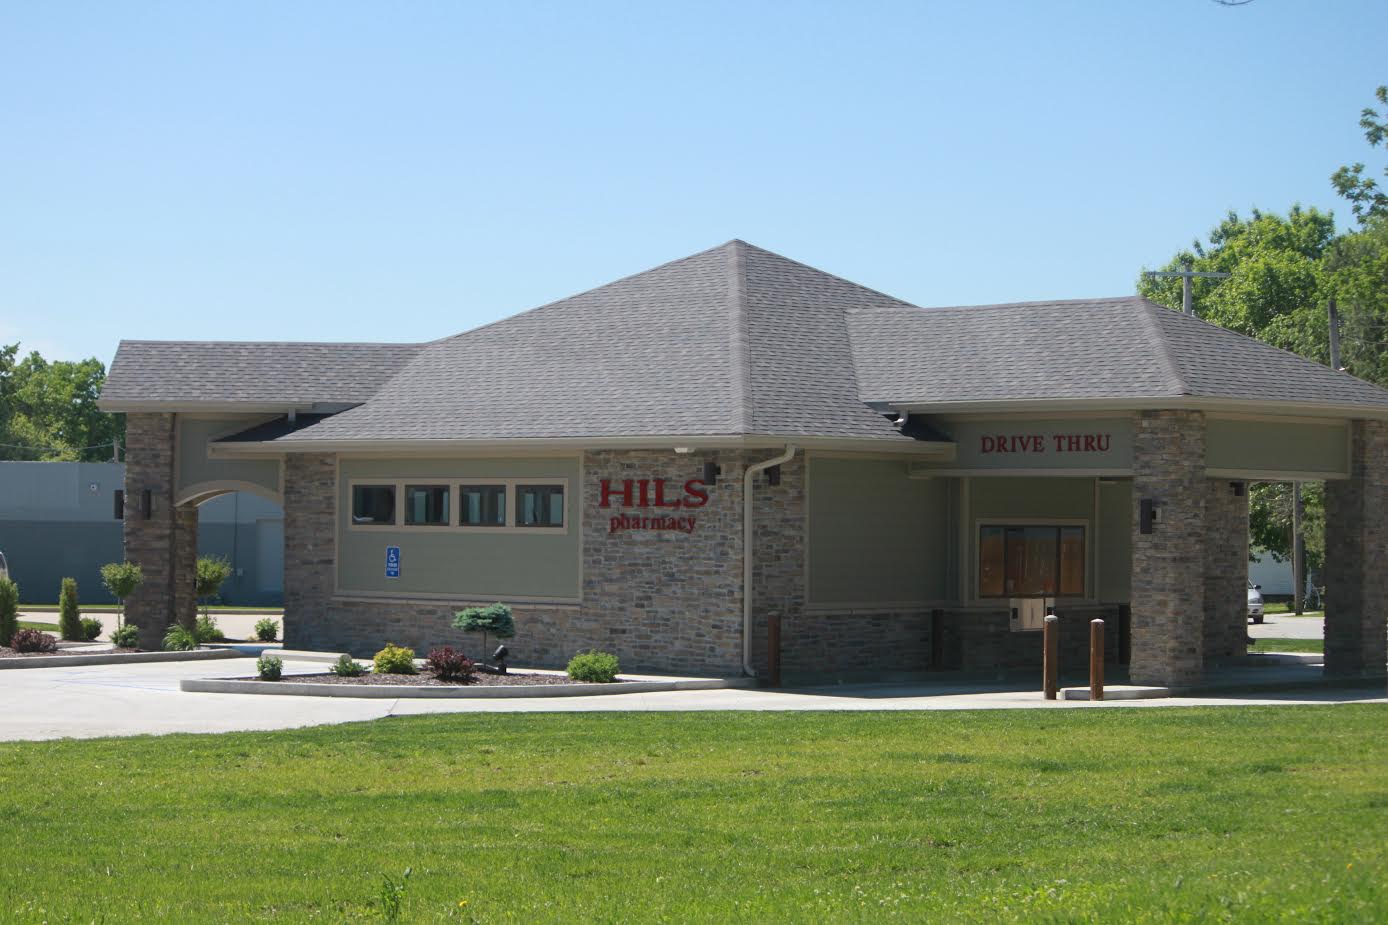 Hils Pharmacy has products & solutions for your health needs in Moberly.